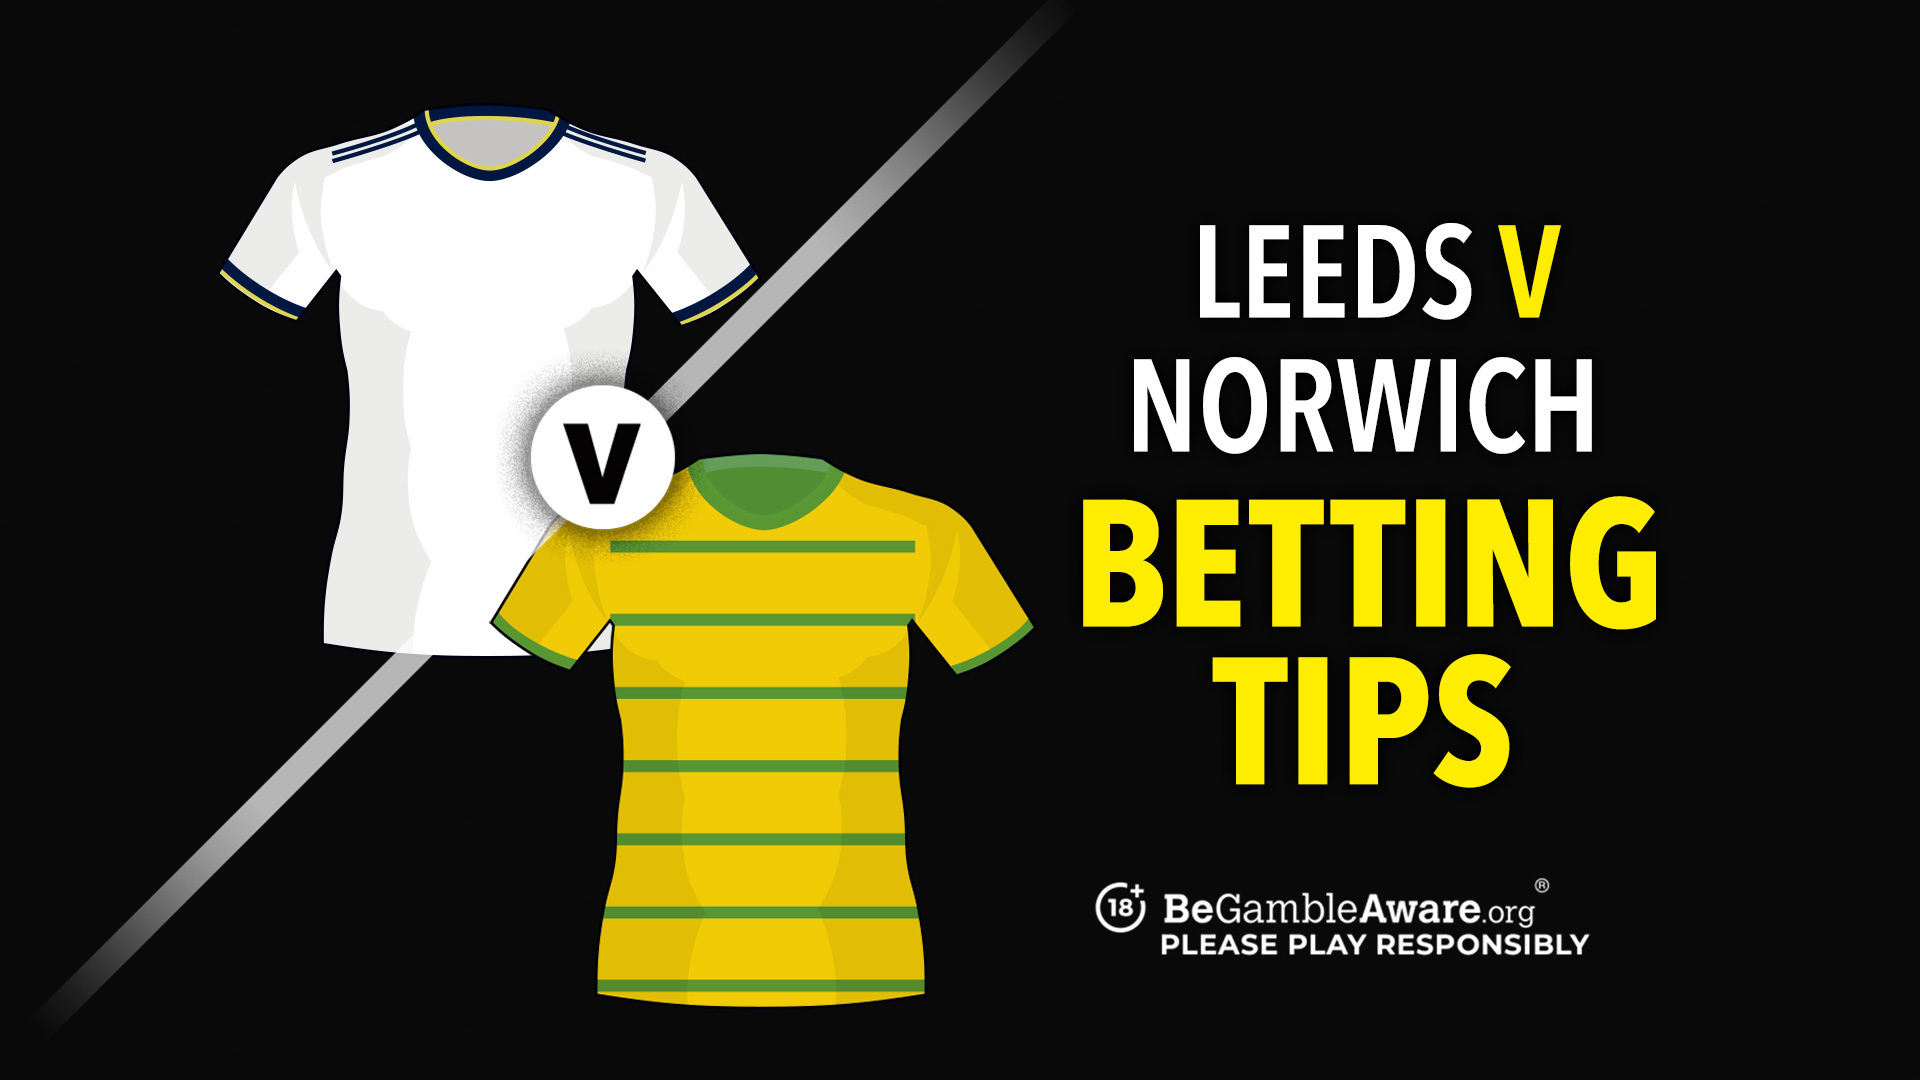 Leeds v Norwich preview, odds and betting tips